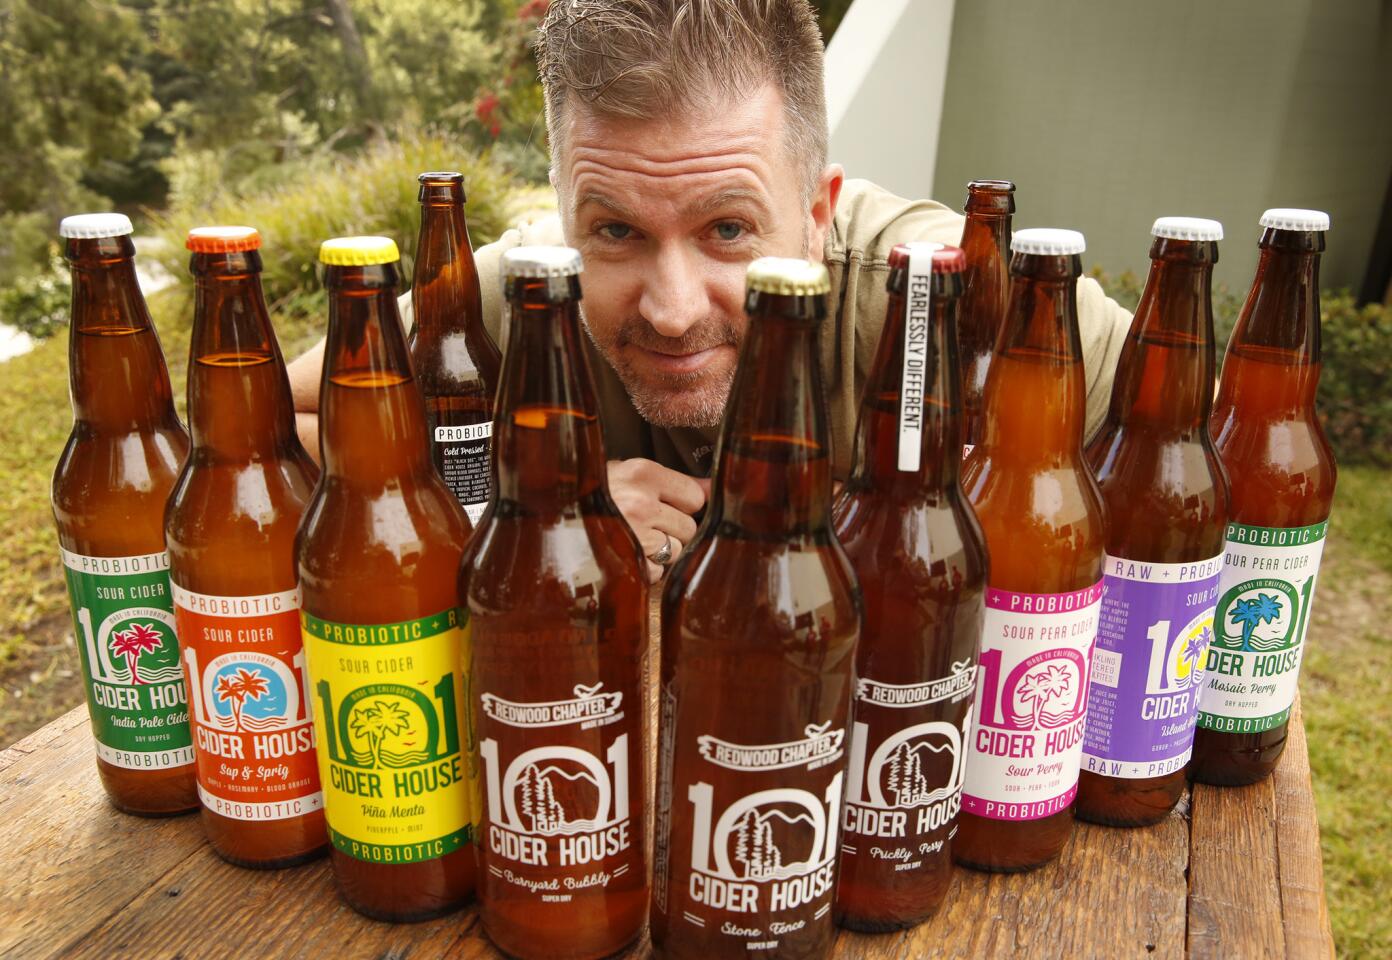 Mark McTavish is the owner of 101 Cider House in Westlake Village. 101 Cider House makes experimental sour ciders from produce grown by farmers along the 101 Freeway.